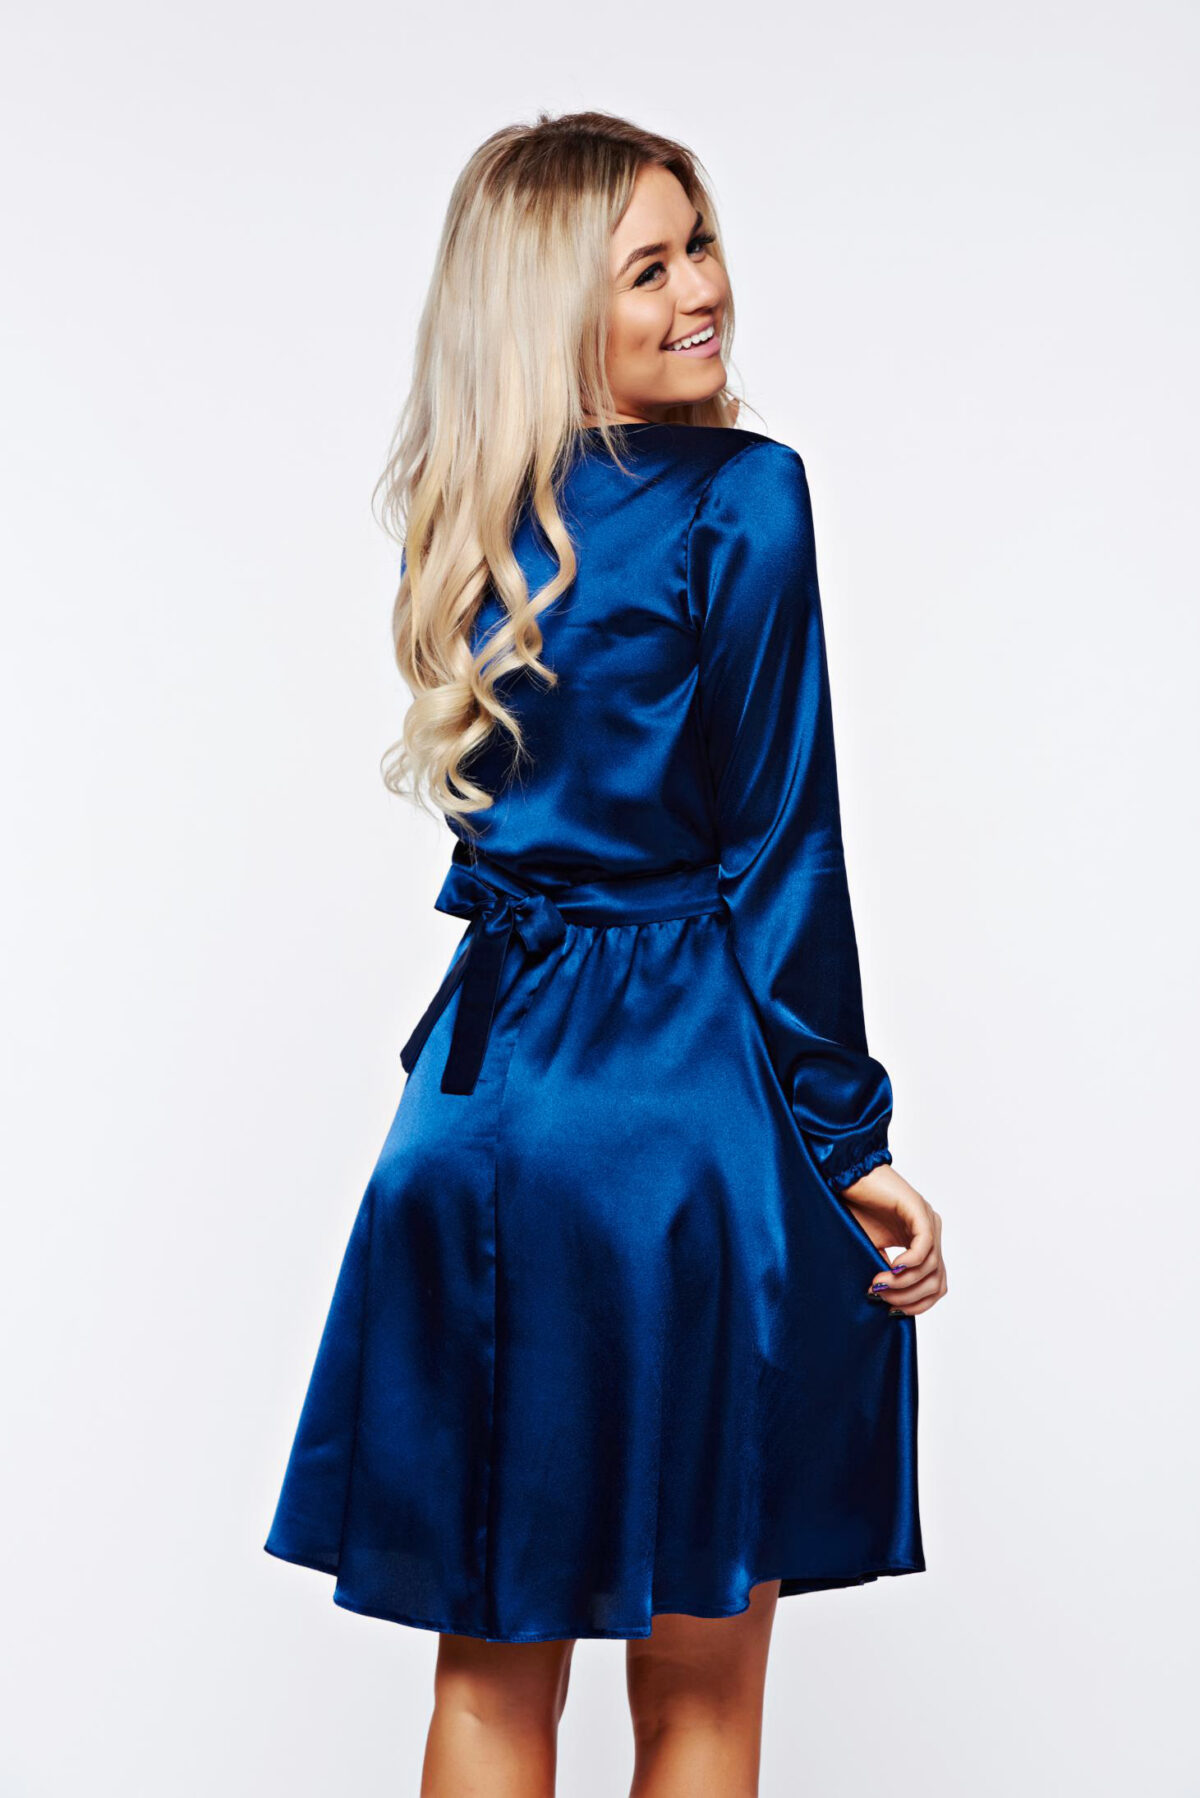 Blue Occasional Dress Strass Wrap Around Of Satin Fabric Texture